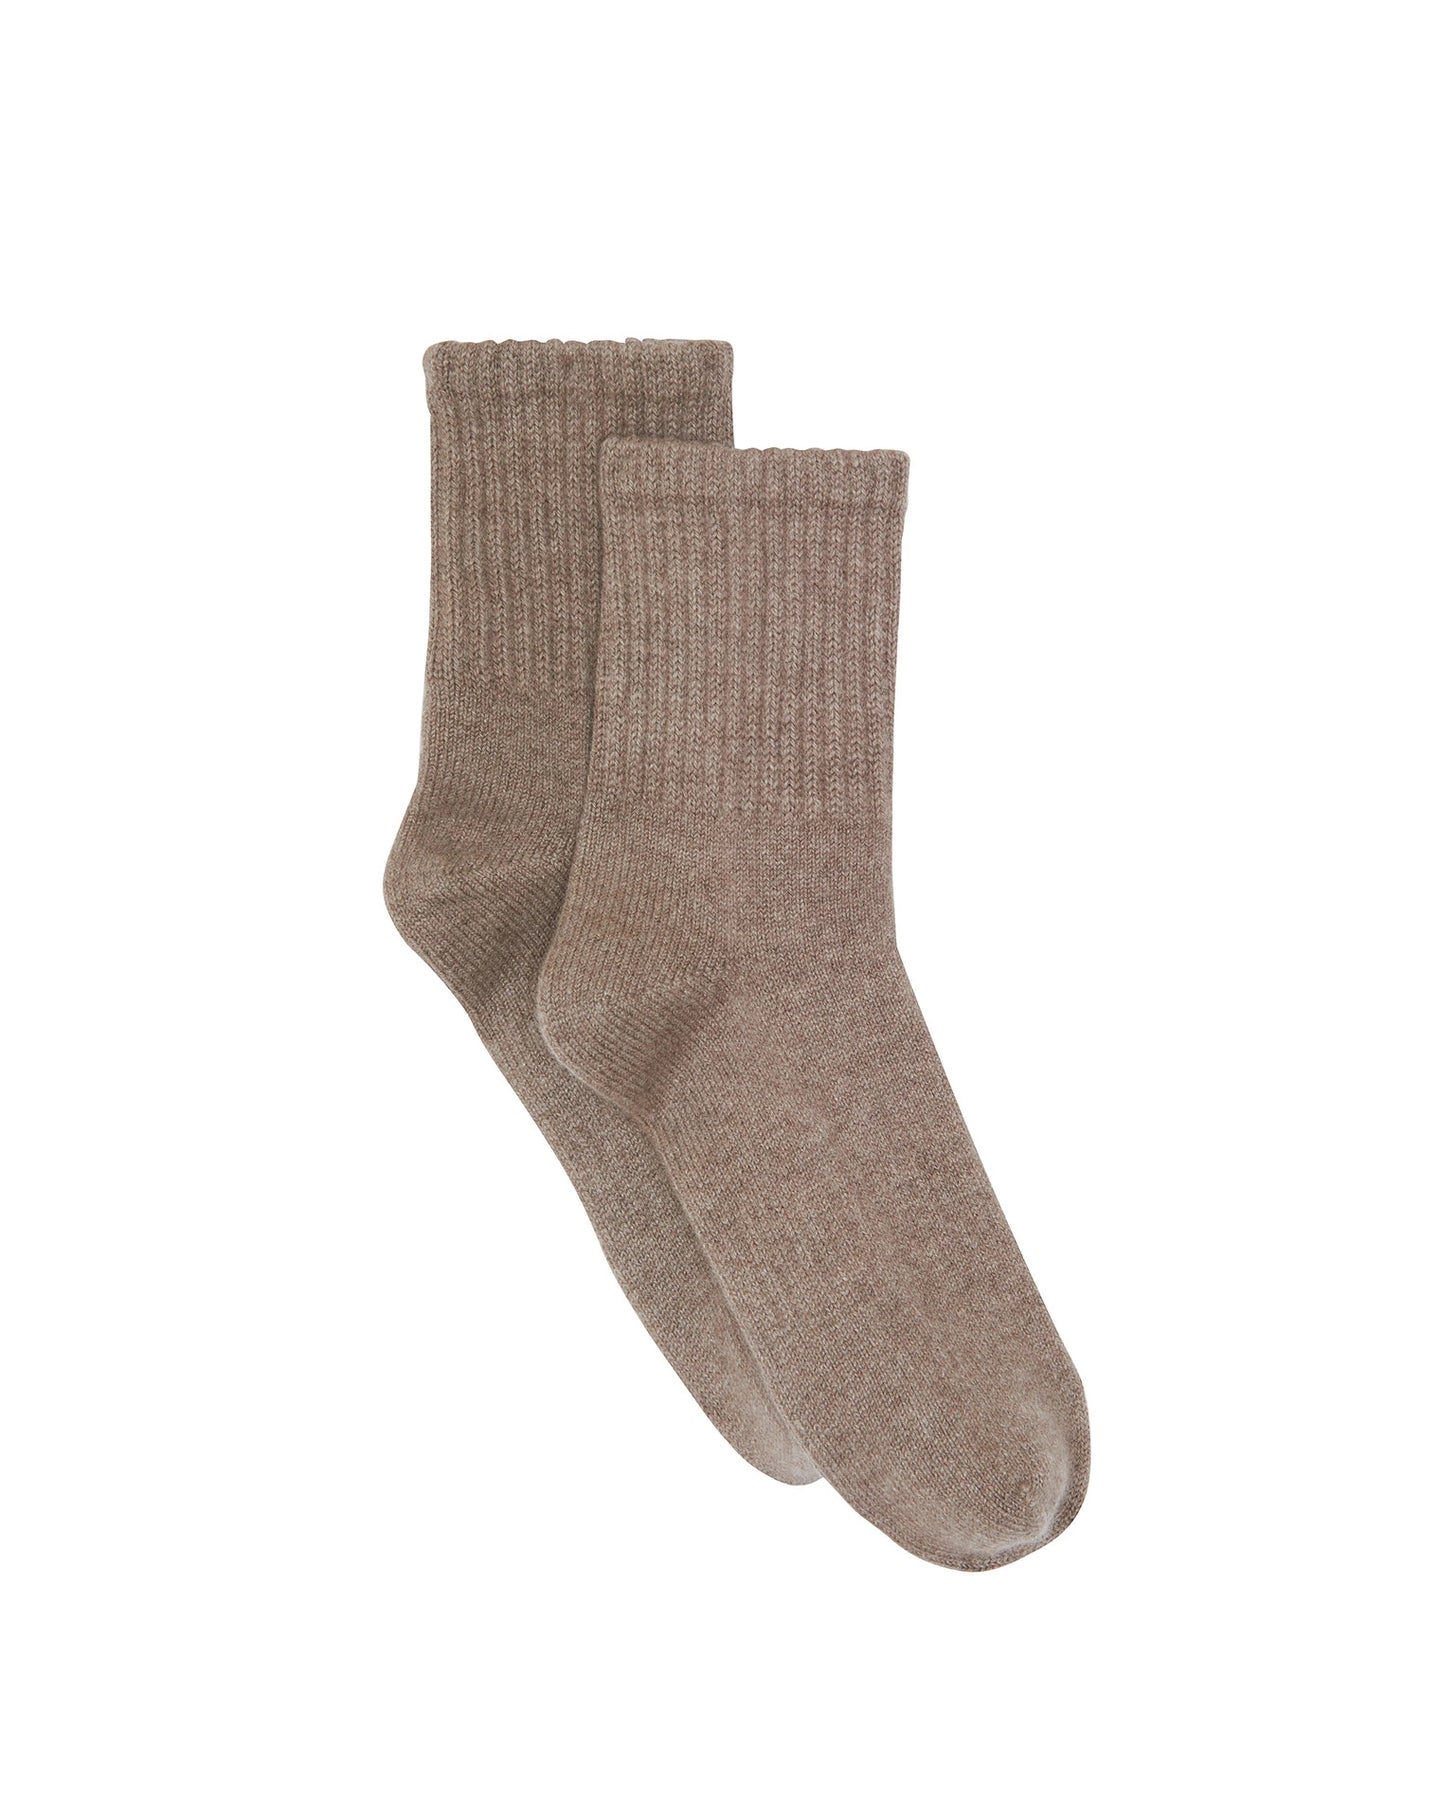 Kujten Chaussettes Cachemire unies Taupe